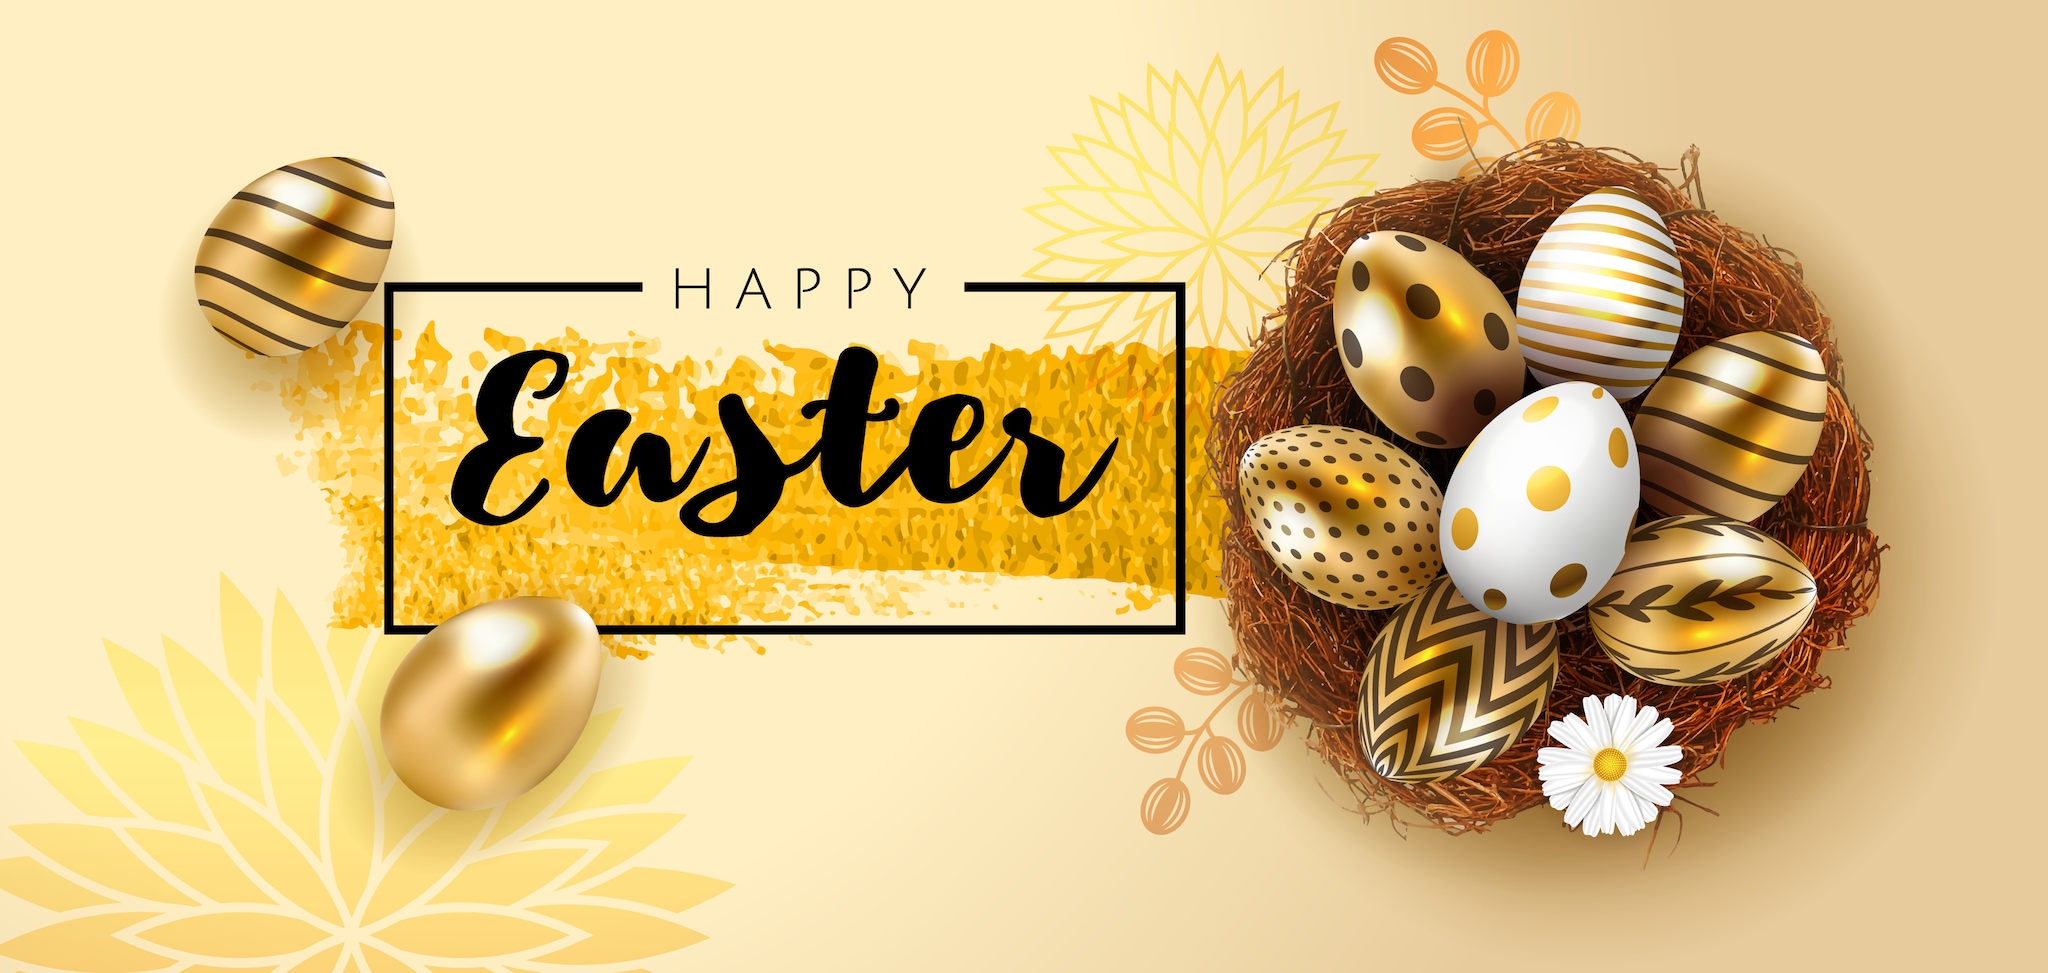 Happy Easter 2022: Wishes, Images, Status, Quotes, Messages and WhatsApp  Greetings to Share on Resurrection Sunday